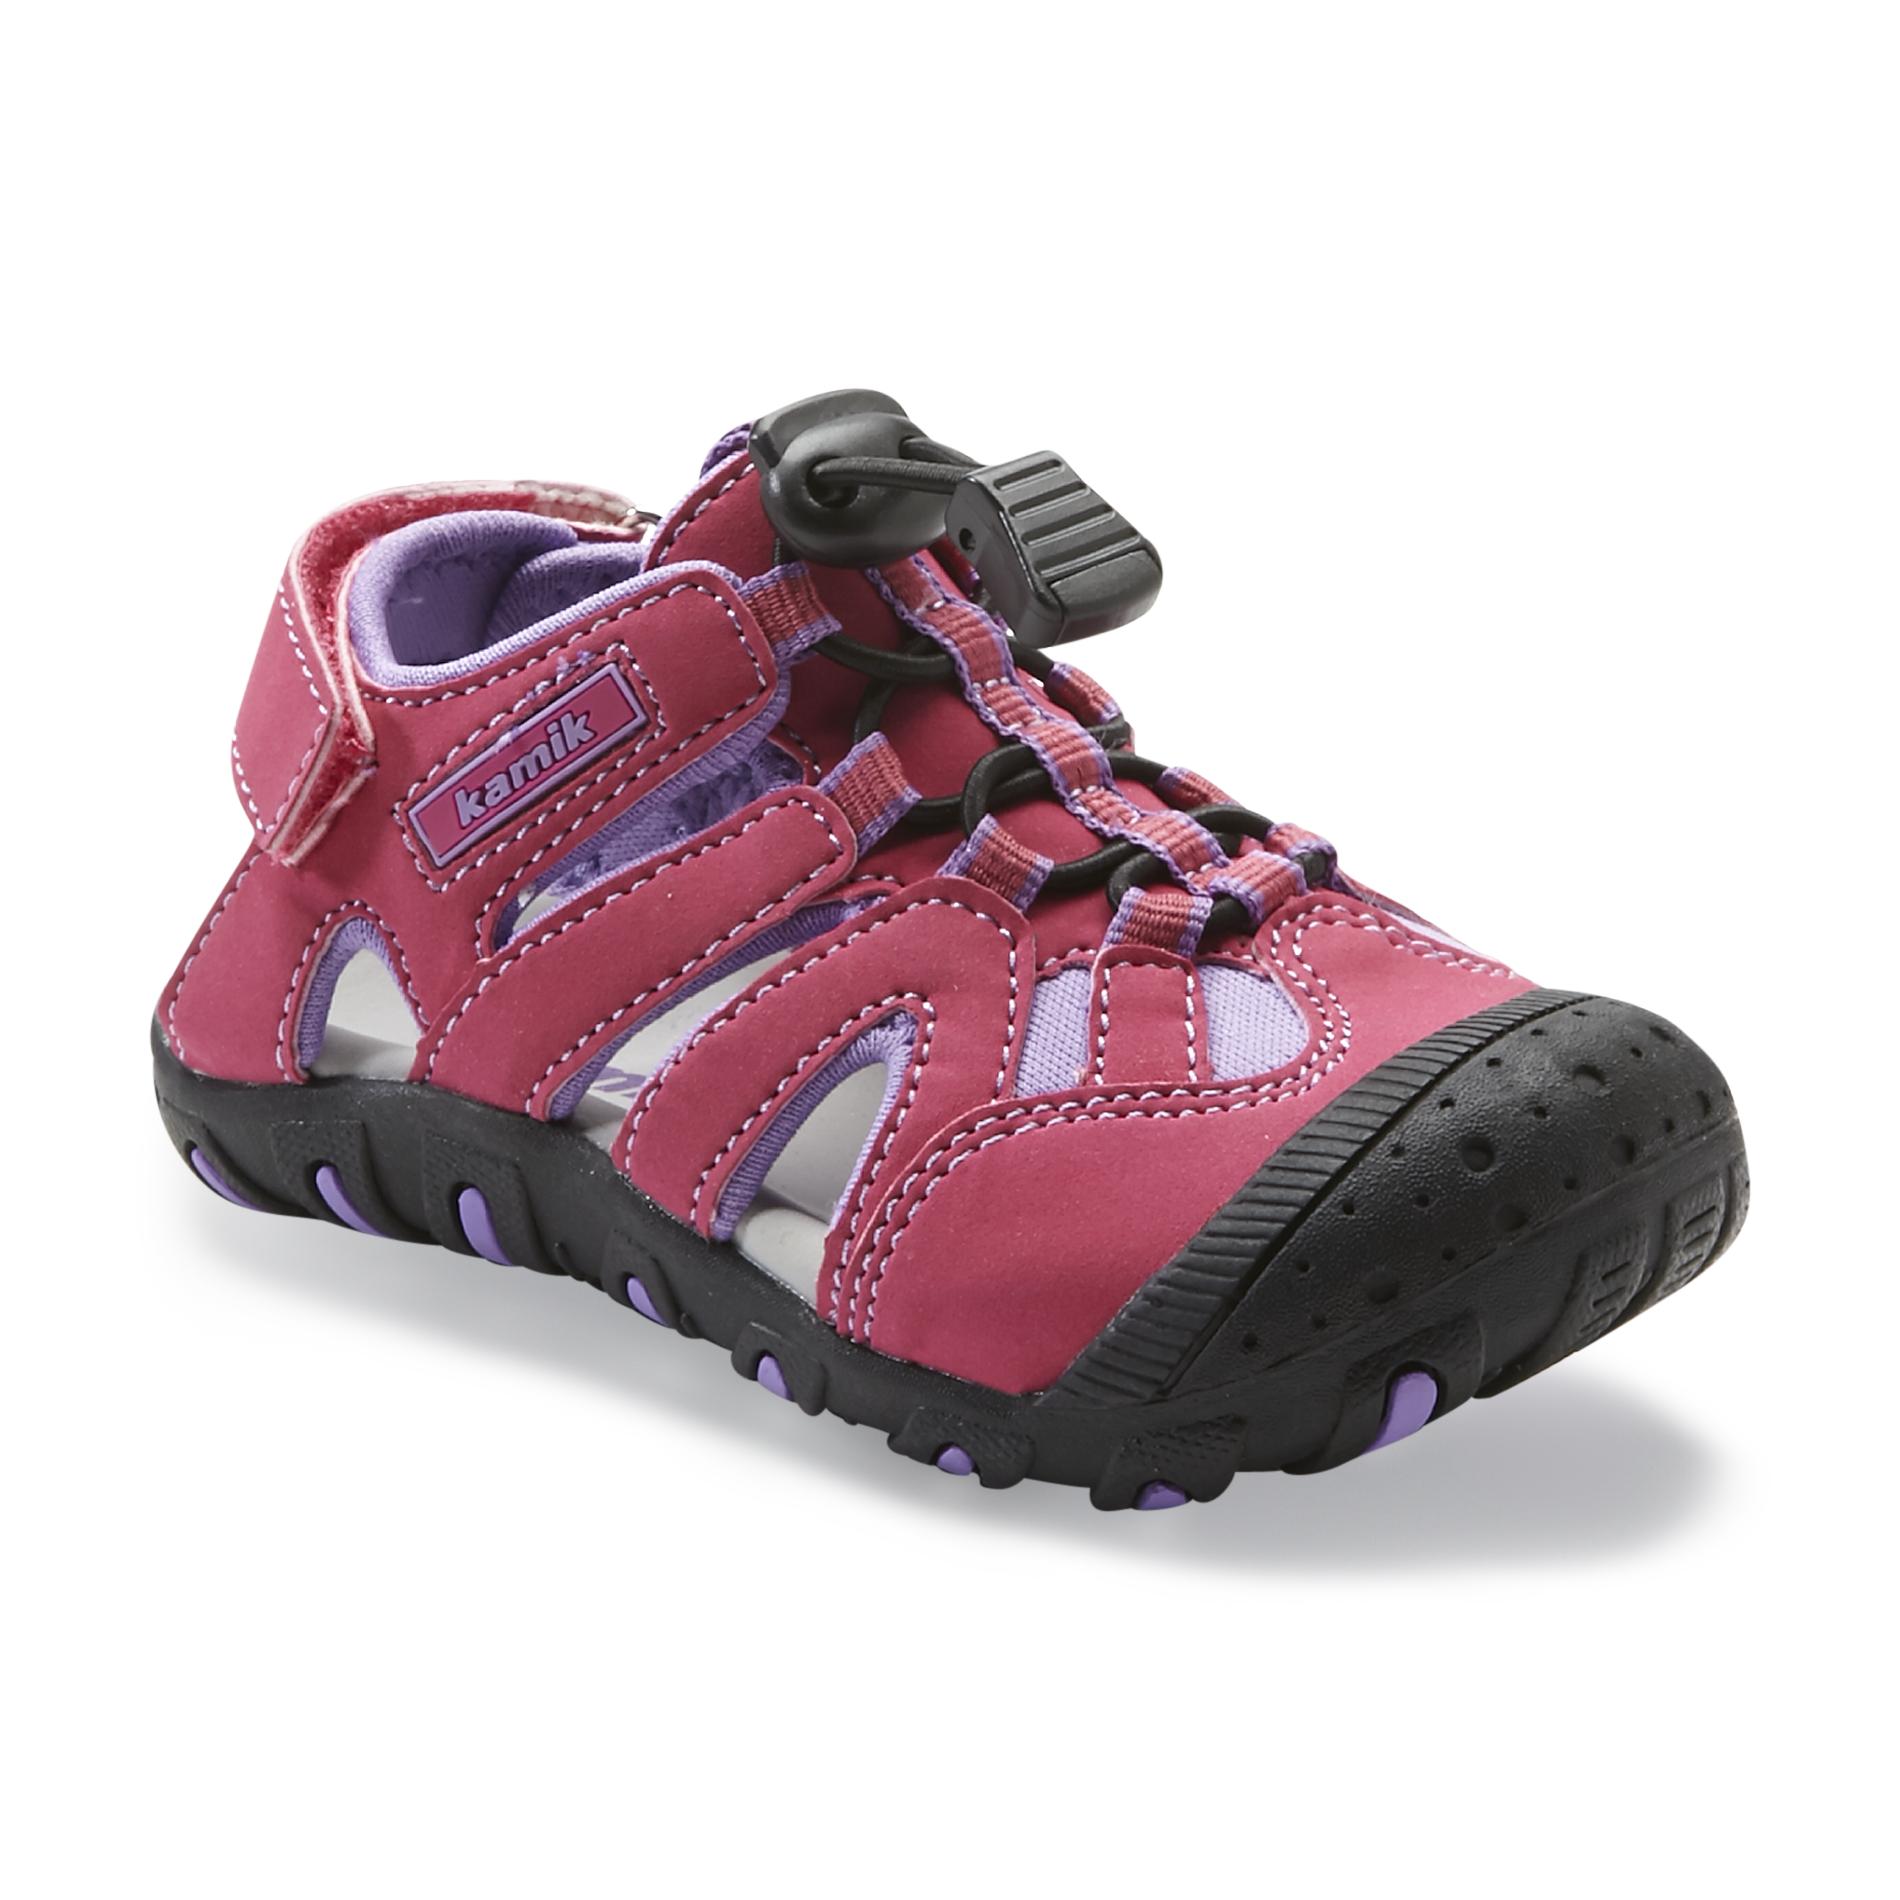 Toddler Girl's Oyster Closed-Toe Pink/Purple Sport Sandal